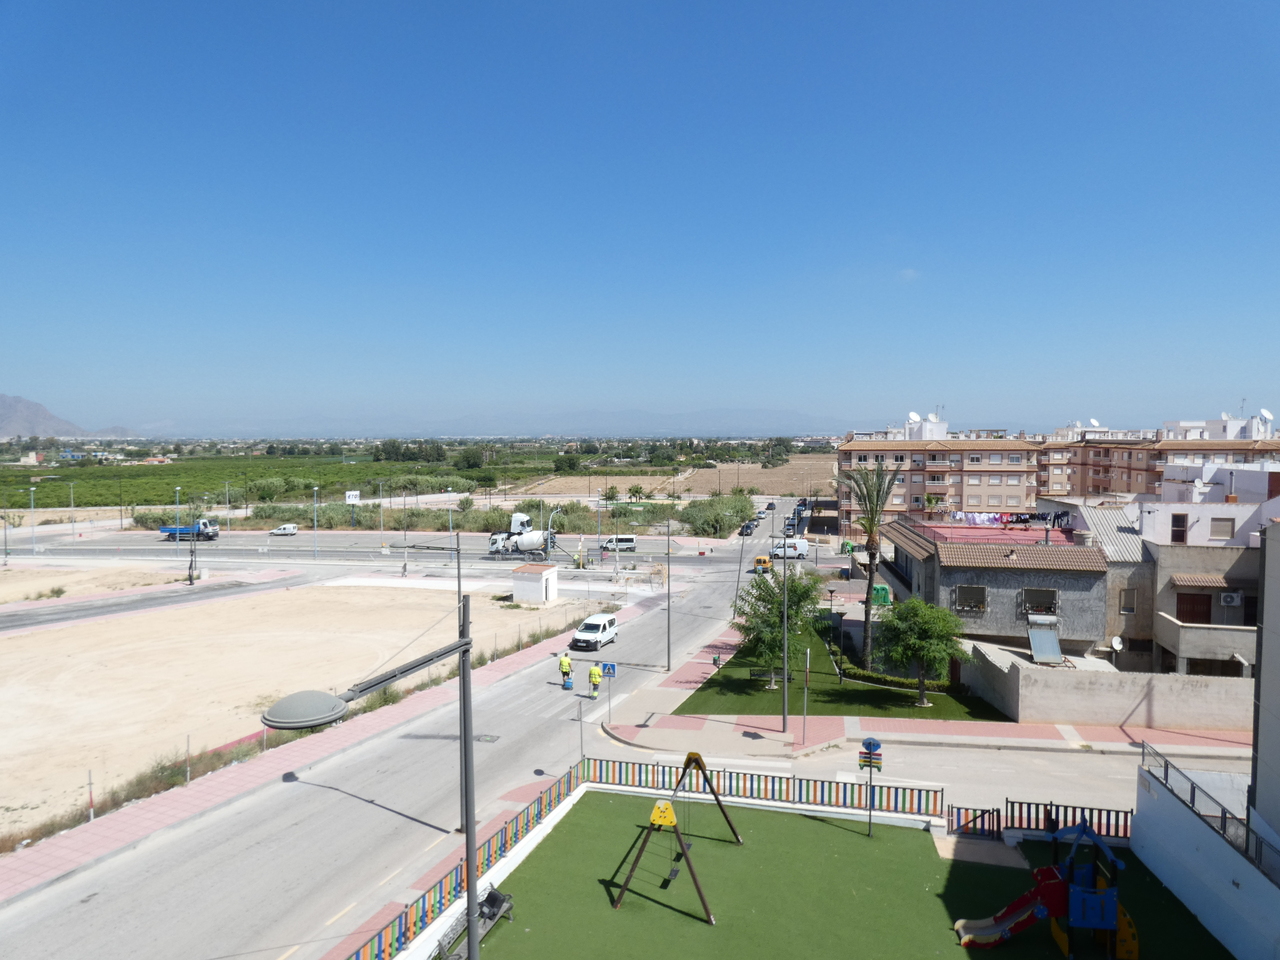 HCB-556: Apartment for sale in Algorfa